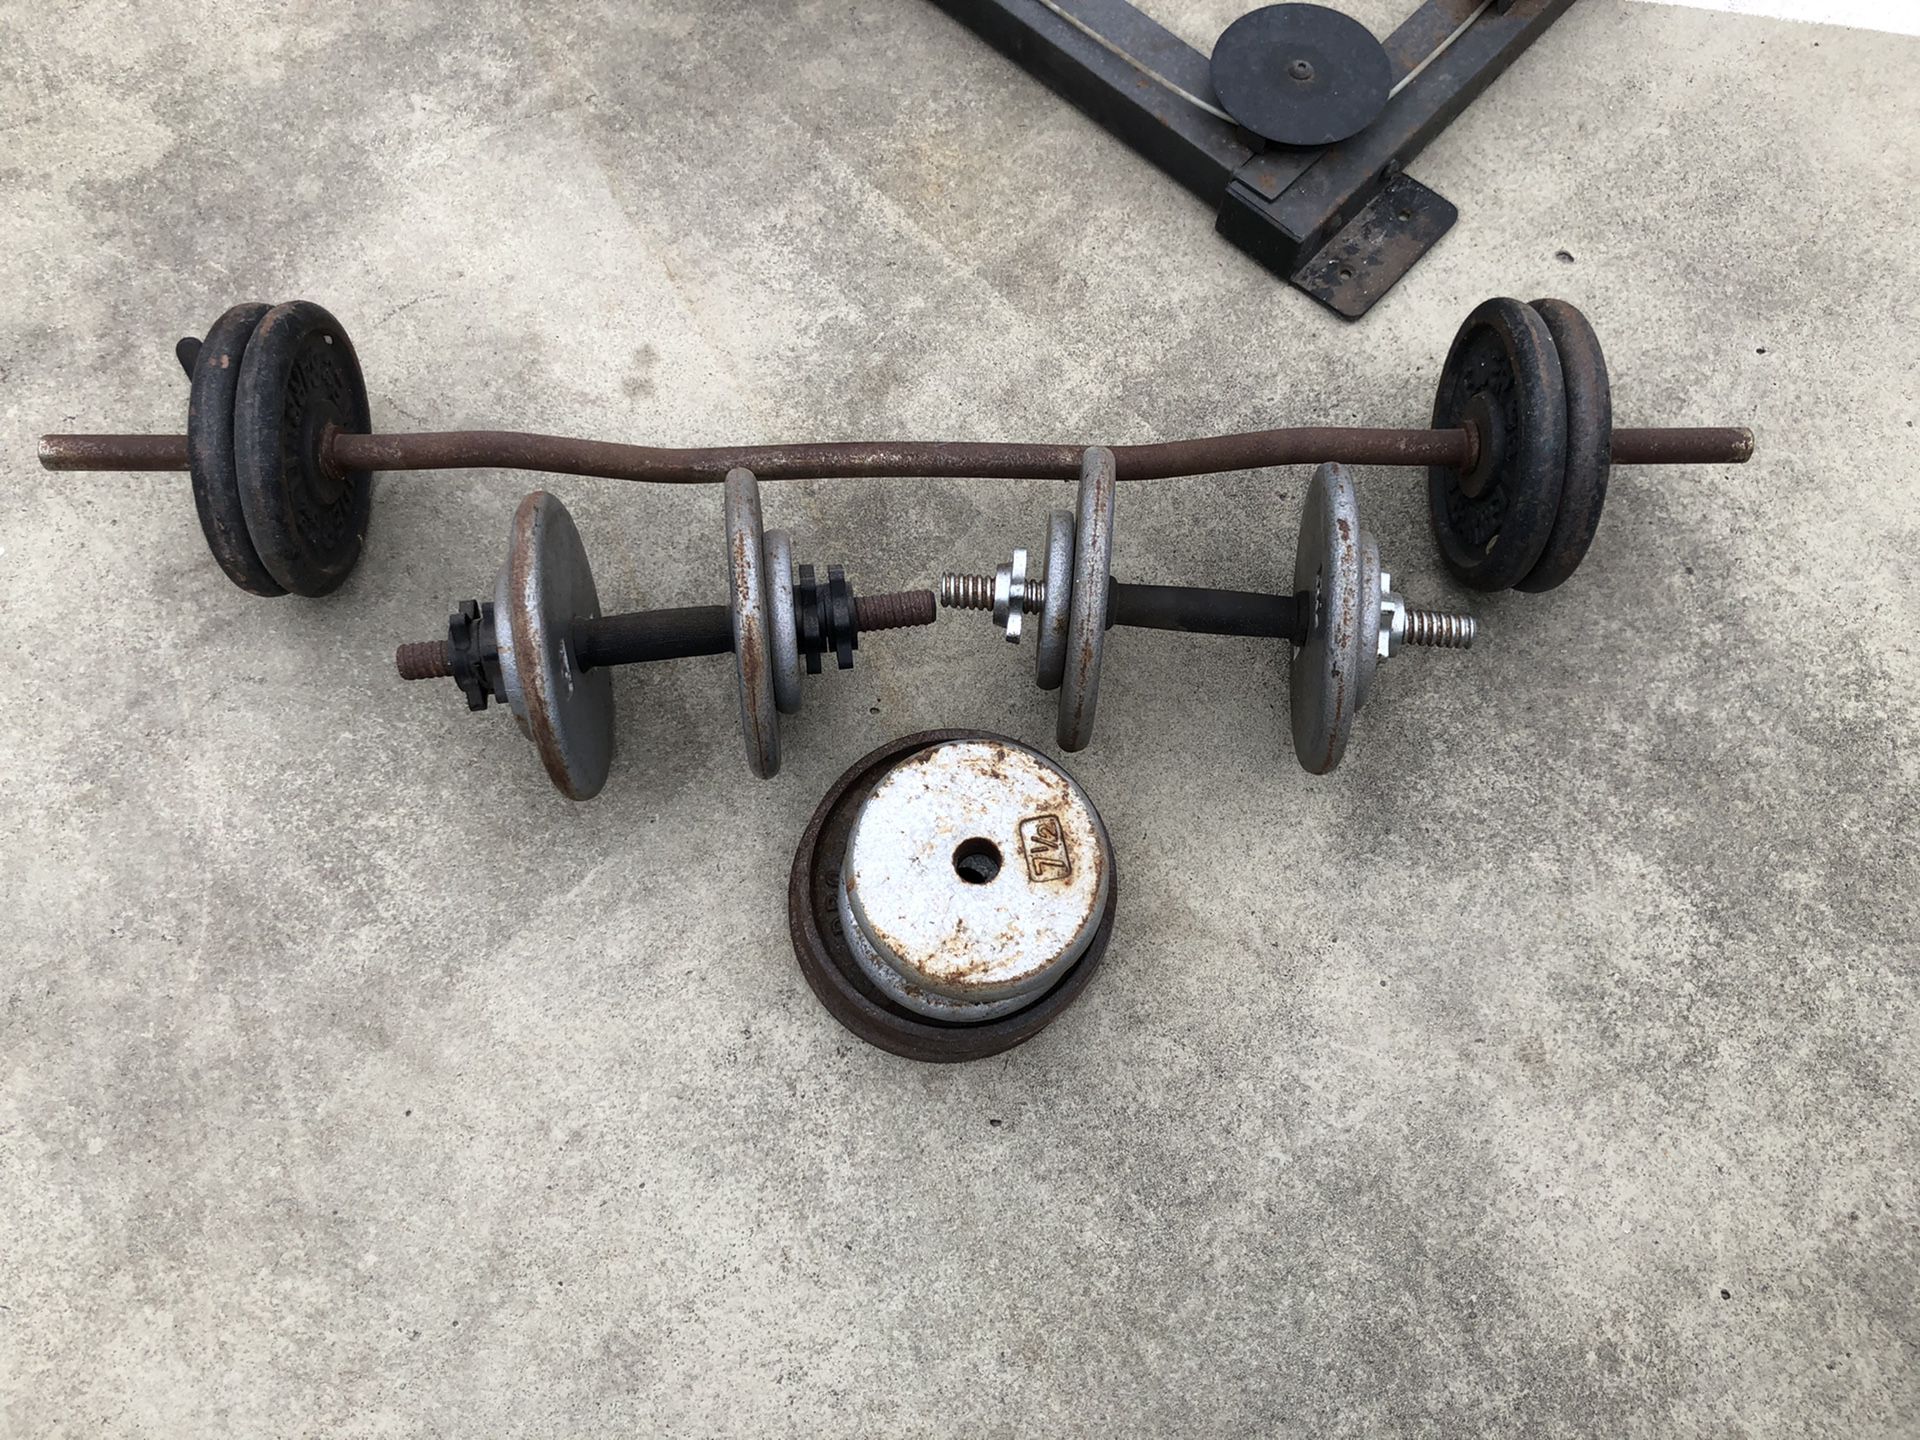 Olympic standard curl bar and adjustable dumbbells 127lbs of standard plates